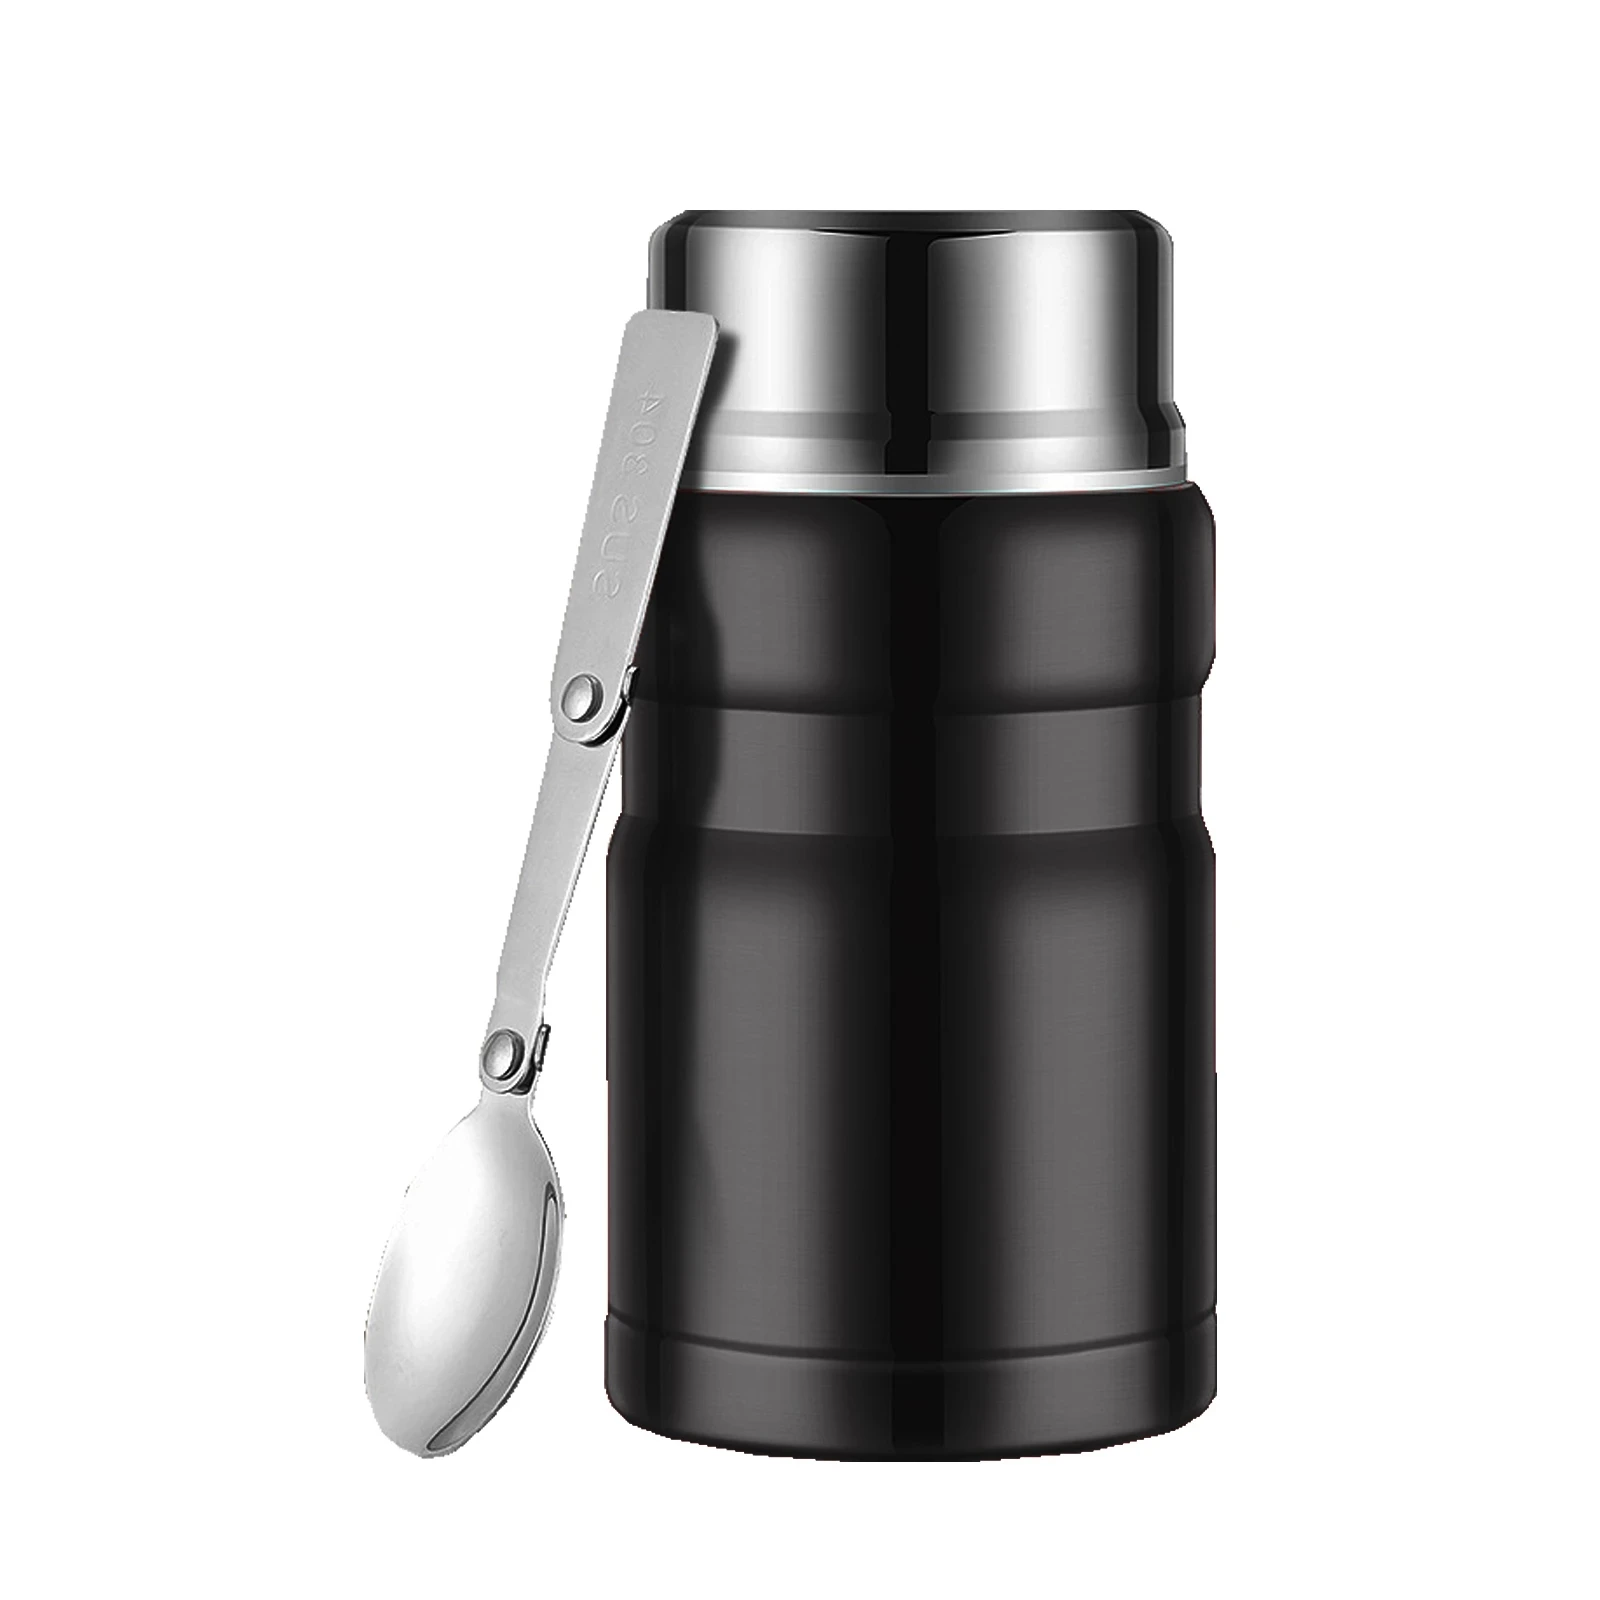 https://ae01.alicdn.com/kf/S78e4ca295a2846108f9c0036ce42ce257/750ml-Large-Capacity-Thermos-Stainless-Steel-Jar-Lunch-Box-Food-Soup-Container-Food-Flask-Free-With.jpg